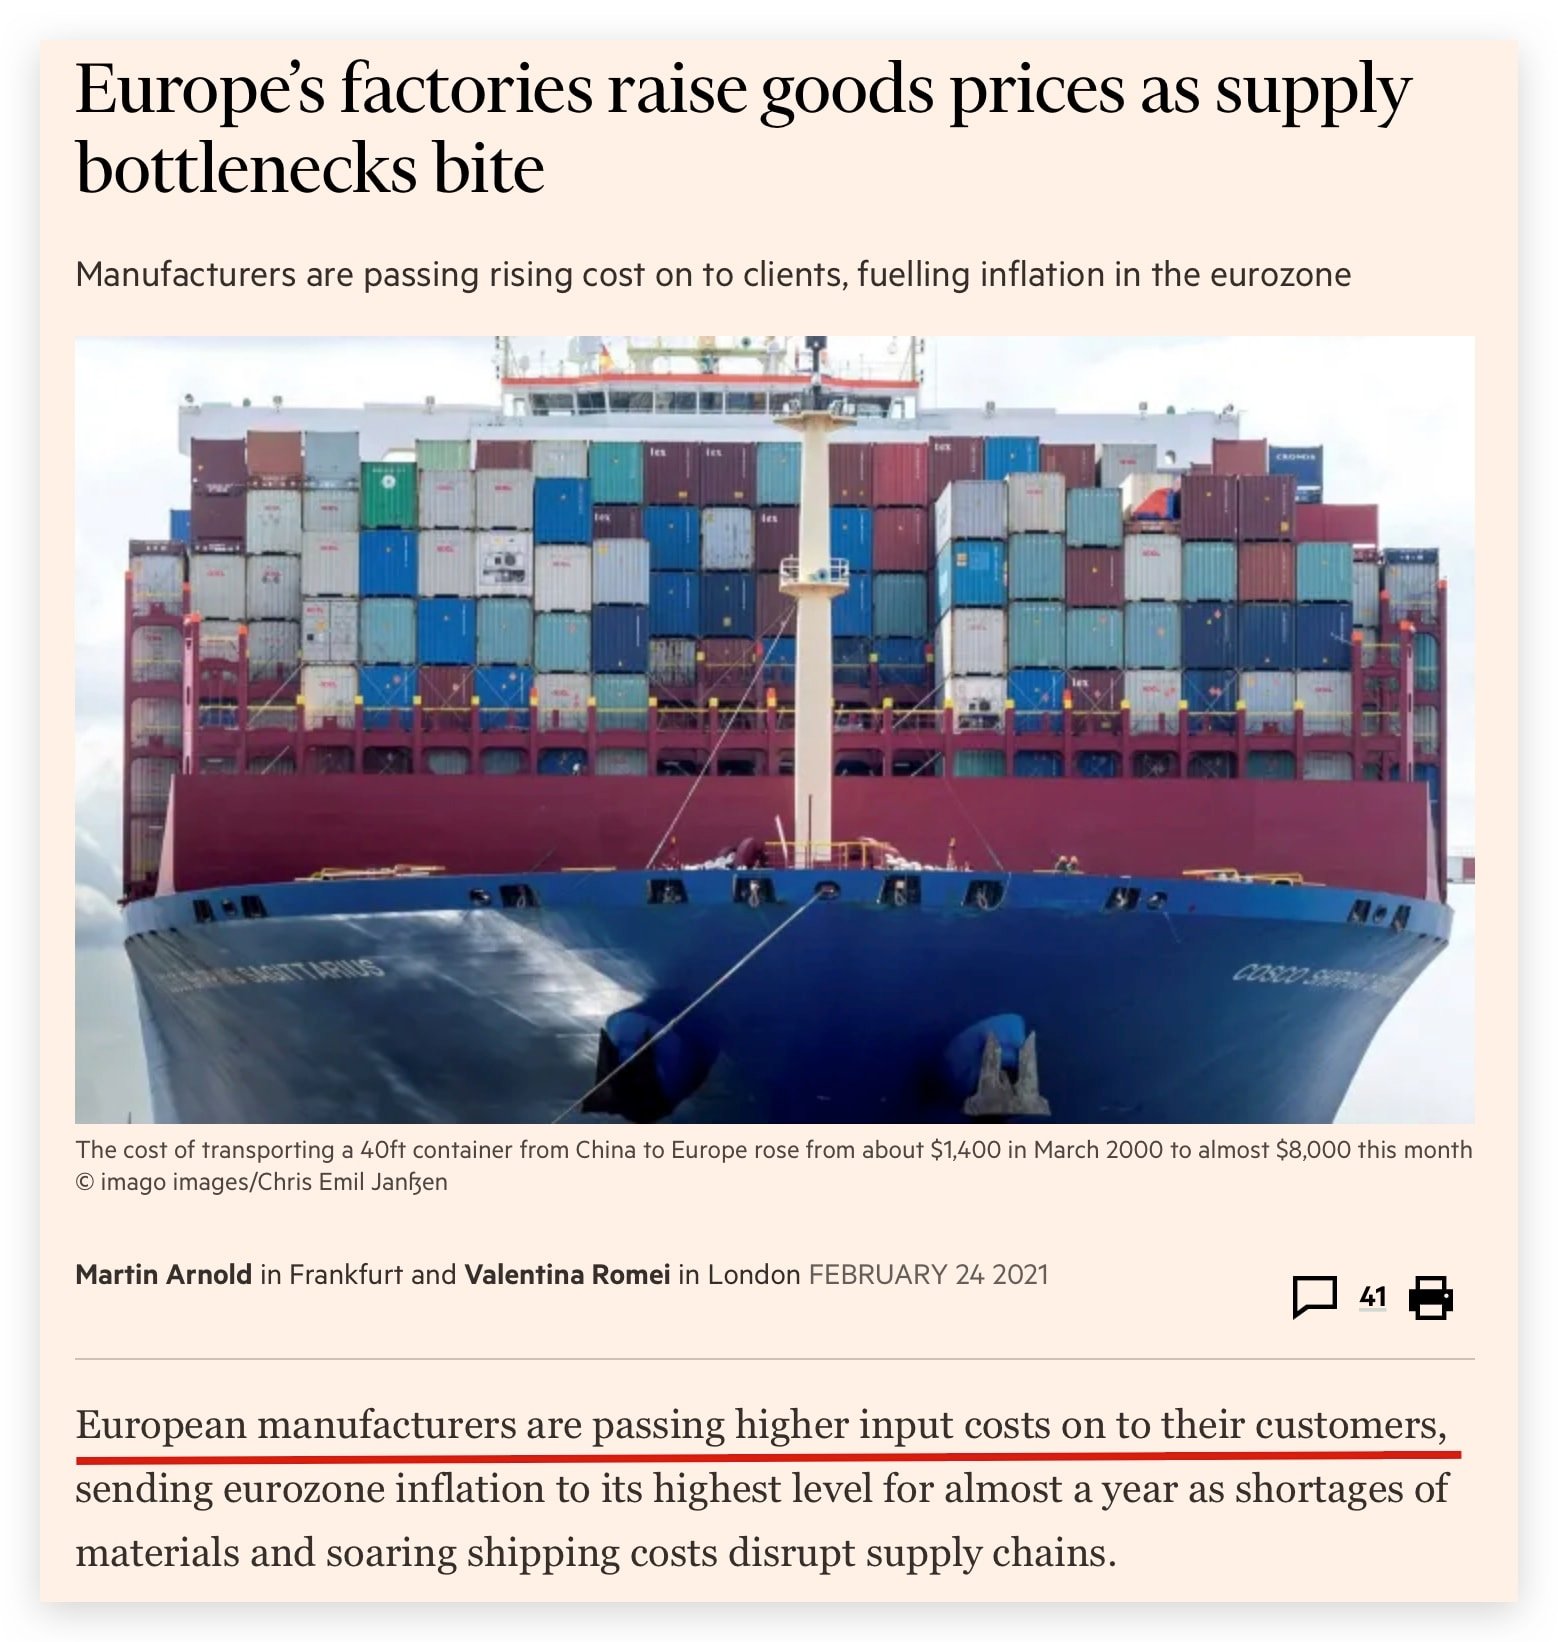 Financial times report